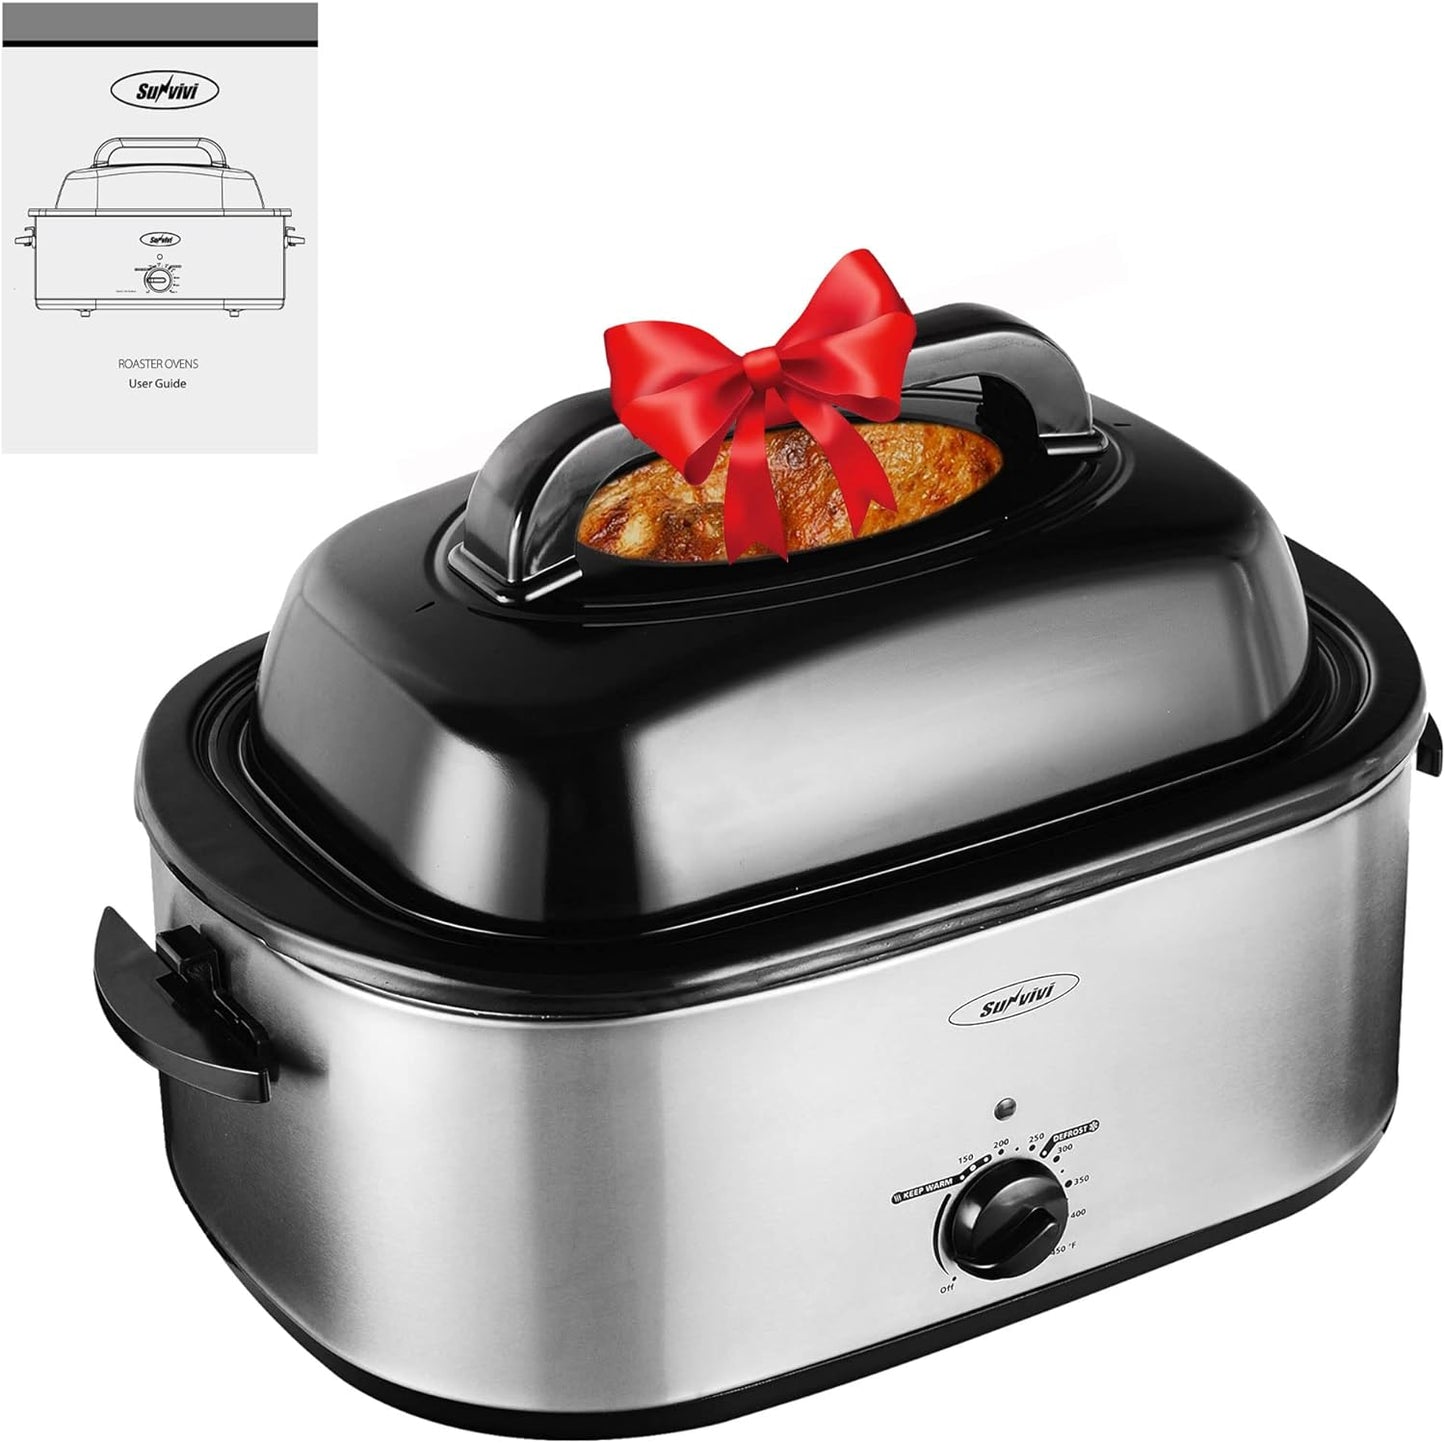 Roaster Oven with Self-Basting Lid, Electric Roaster with Removable Pan & Rack, 150-450°F Full-Range Temperature Control with Defrost/Warm Function, Stainless Steel, Silver